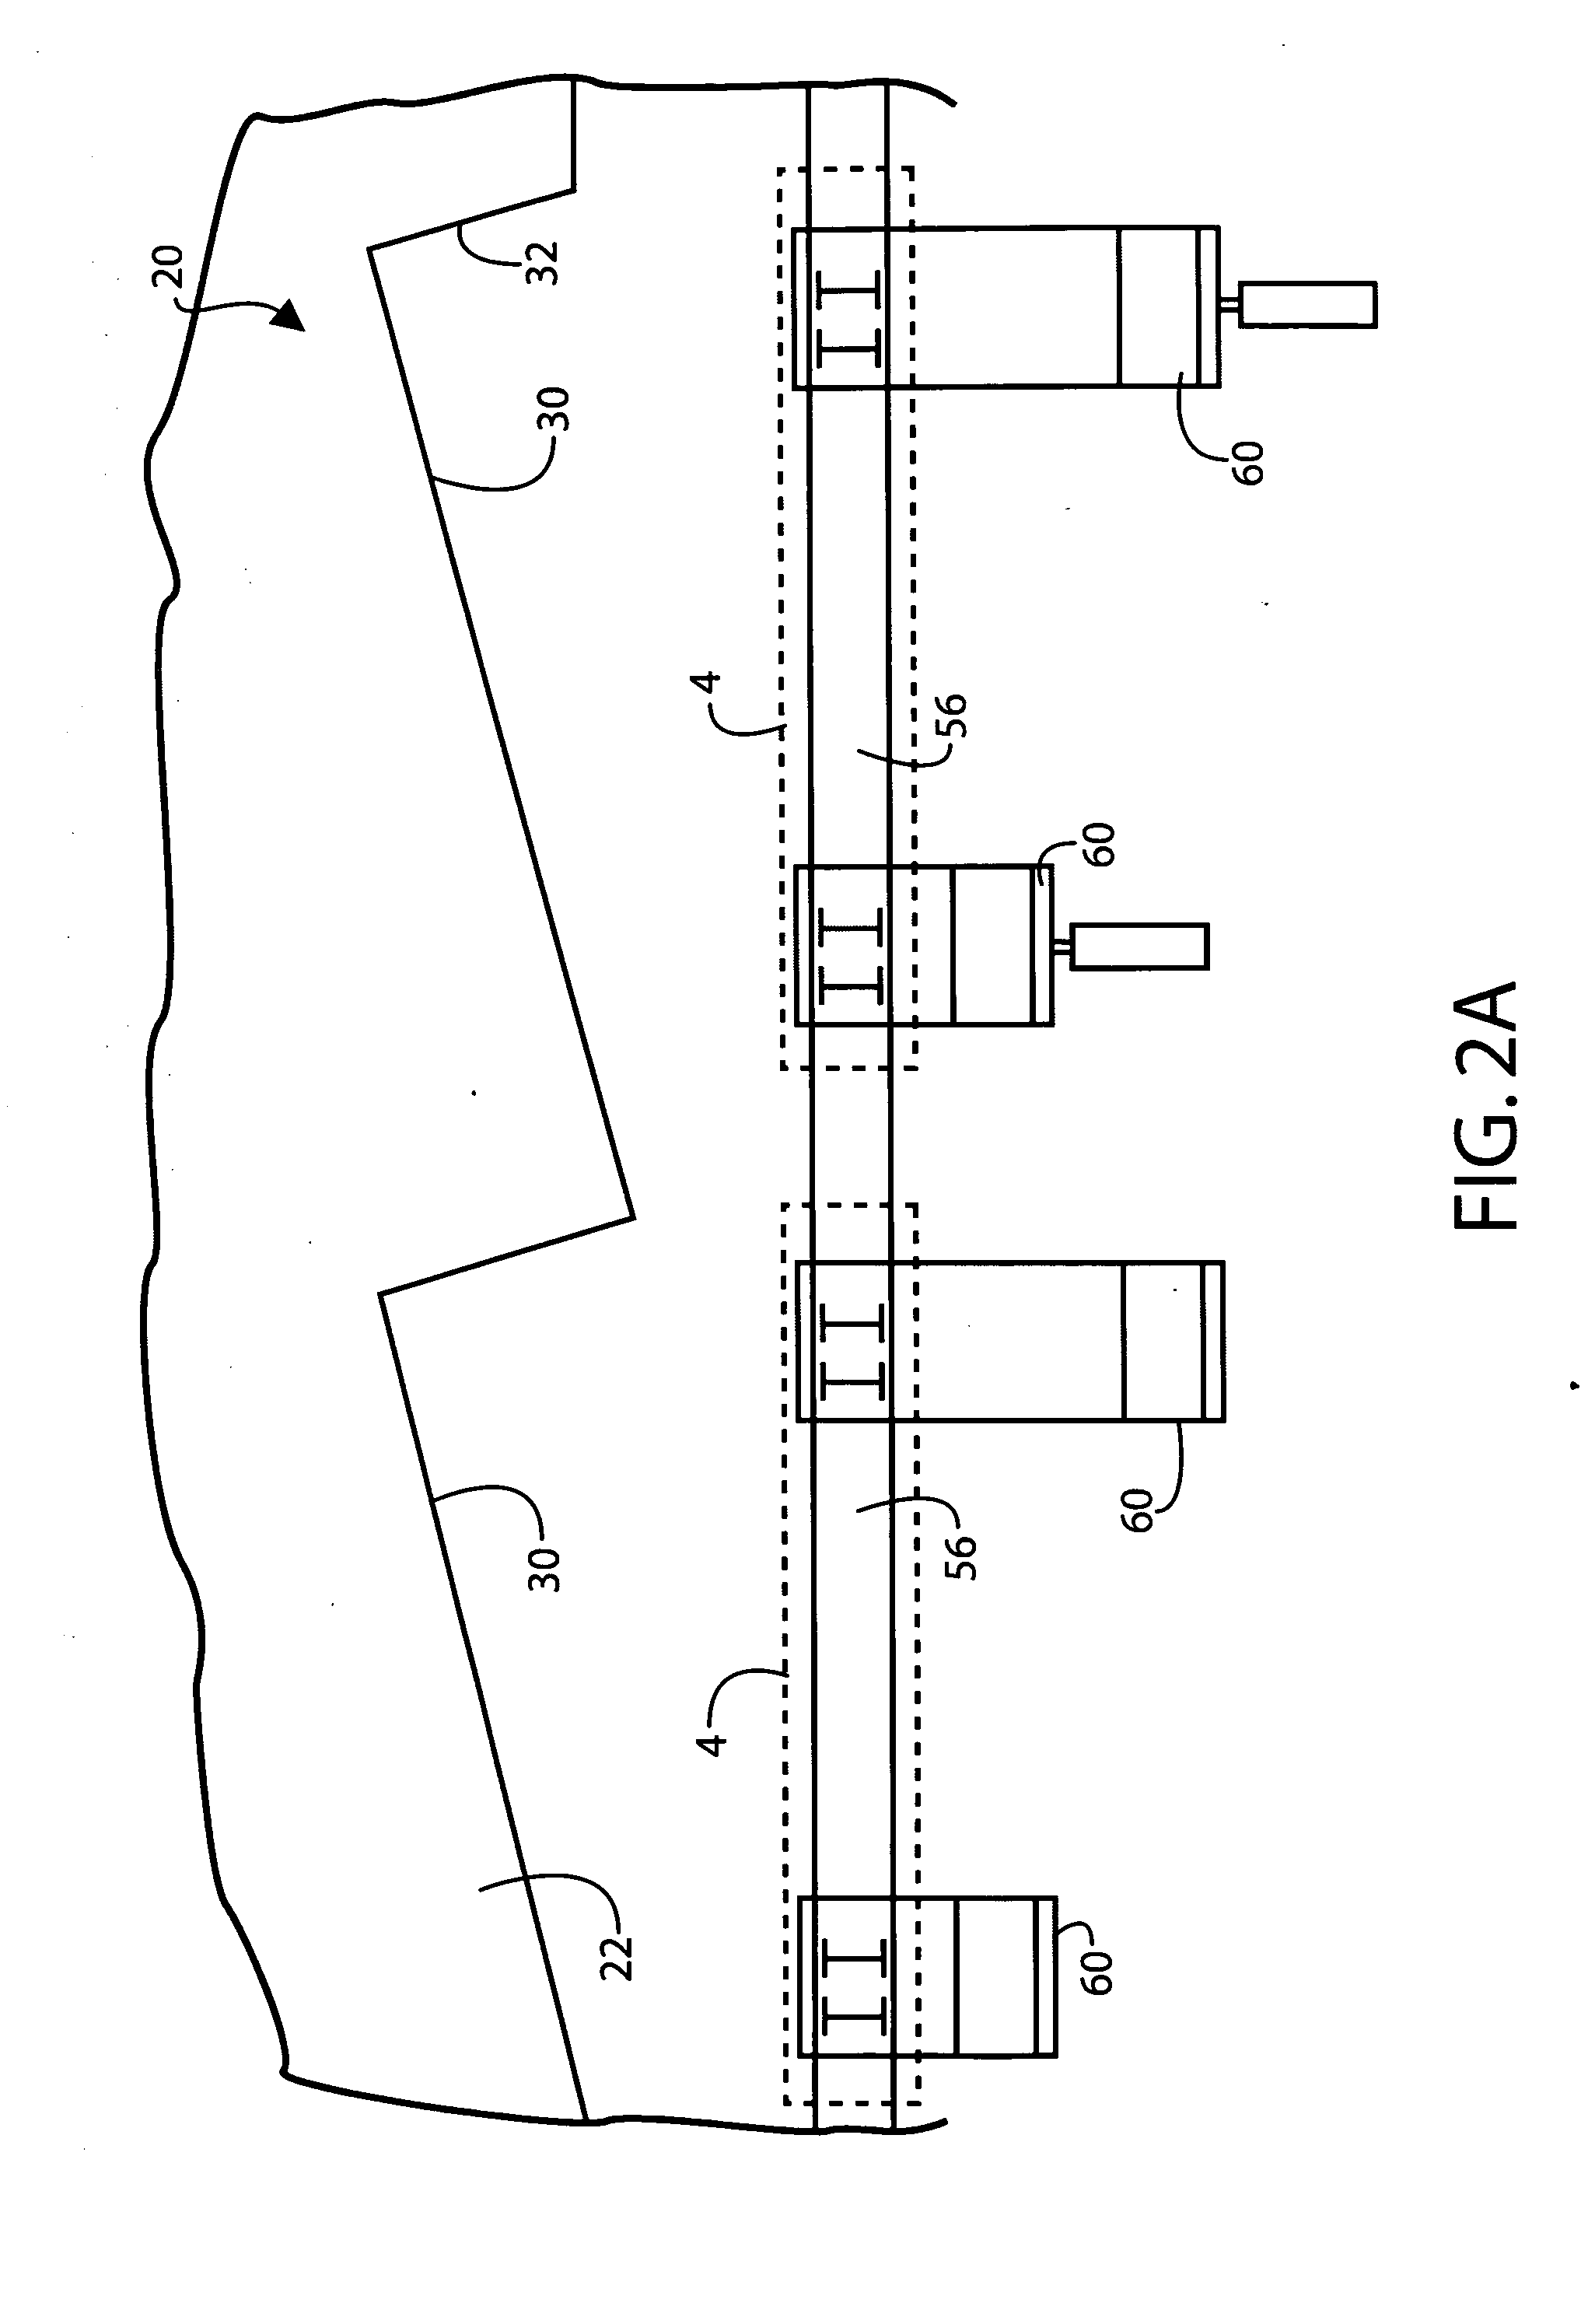 System, network and method for transporting cargo